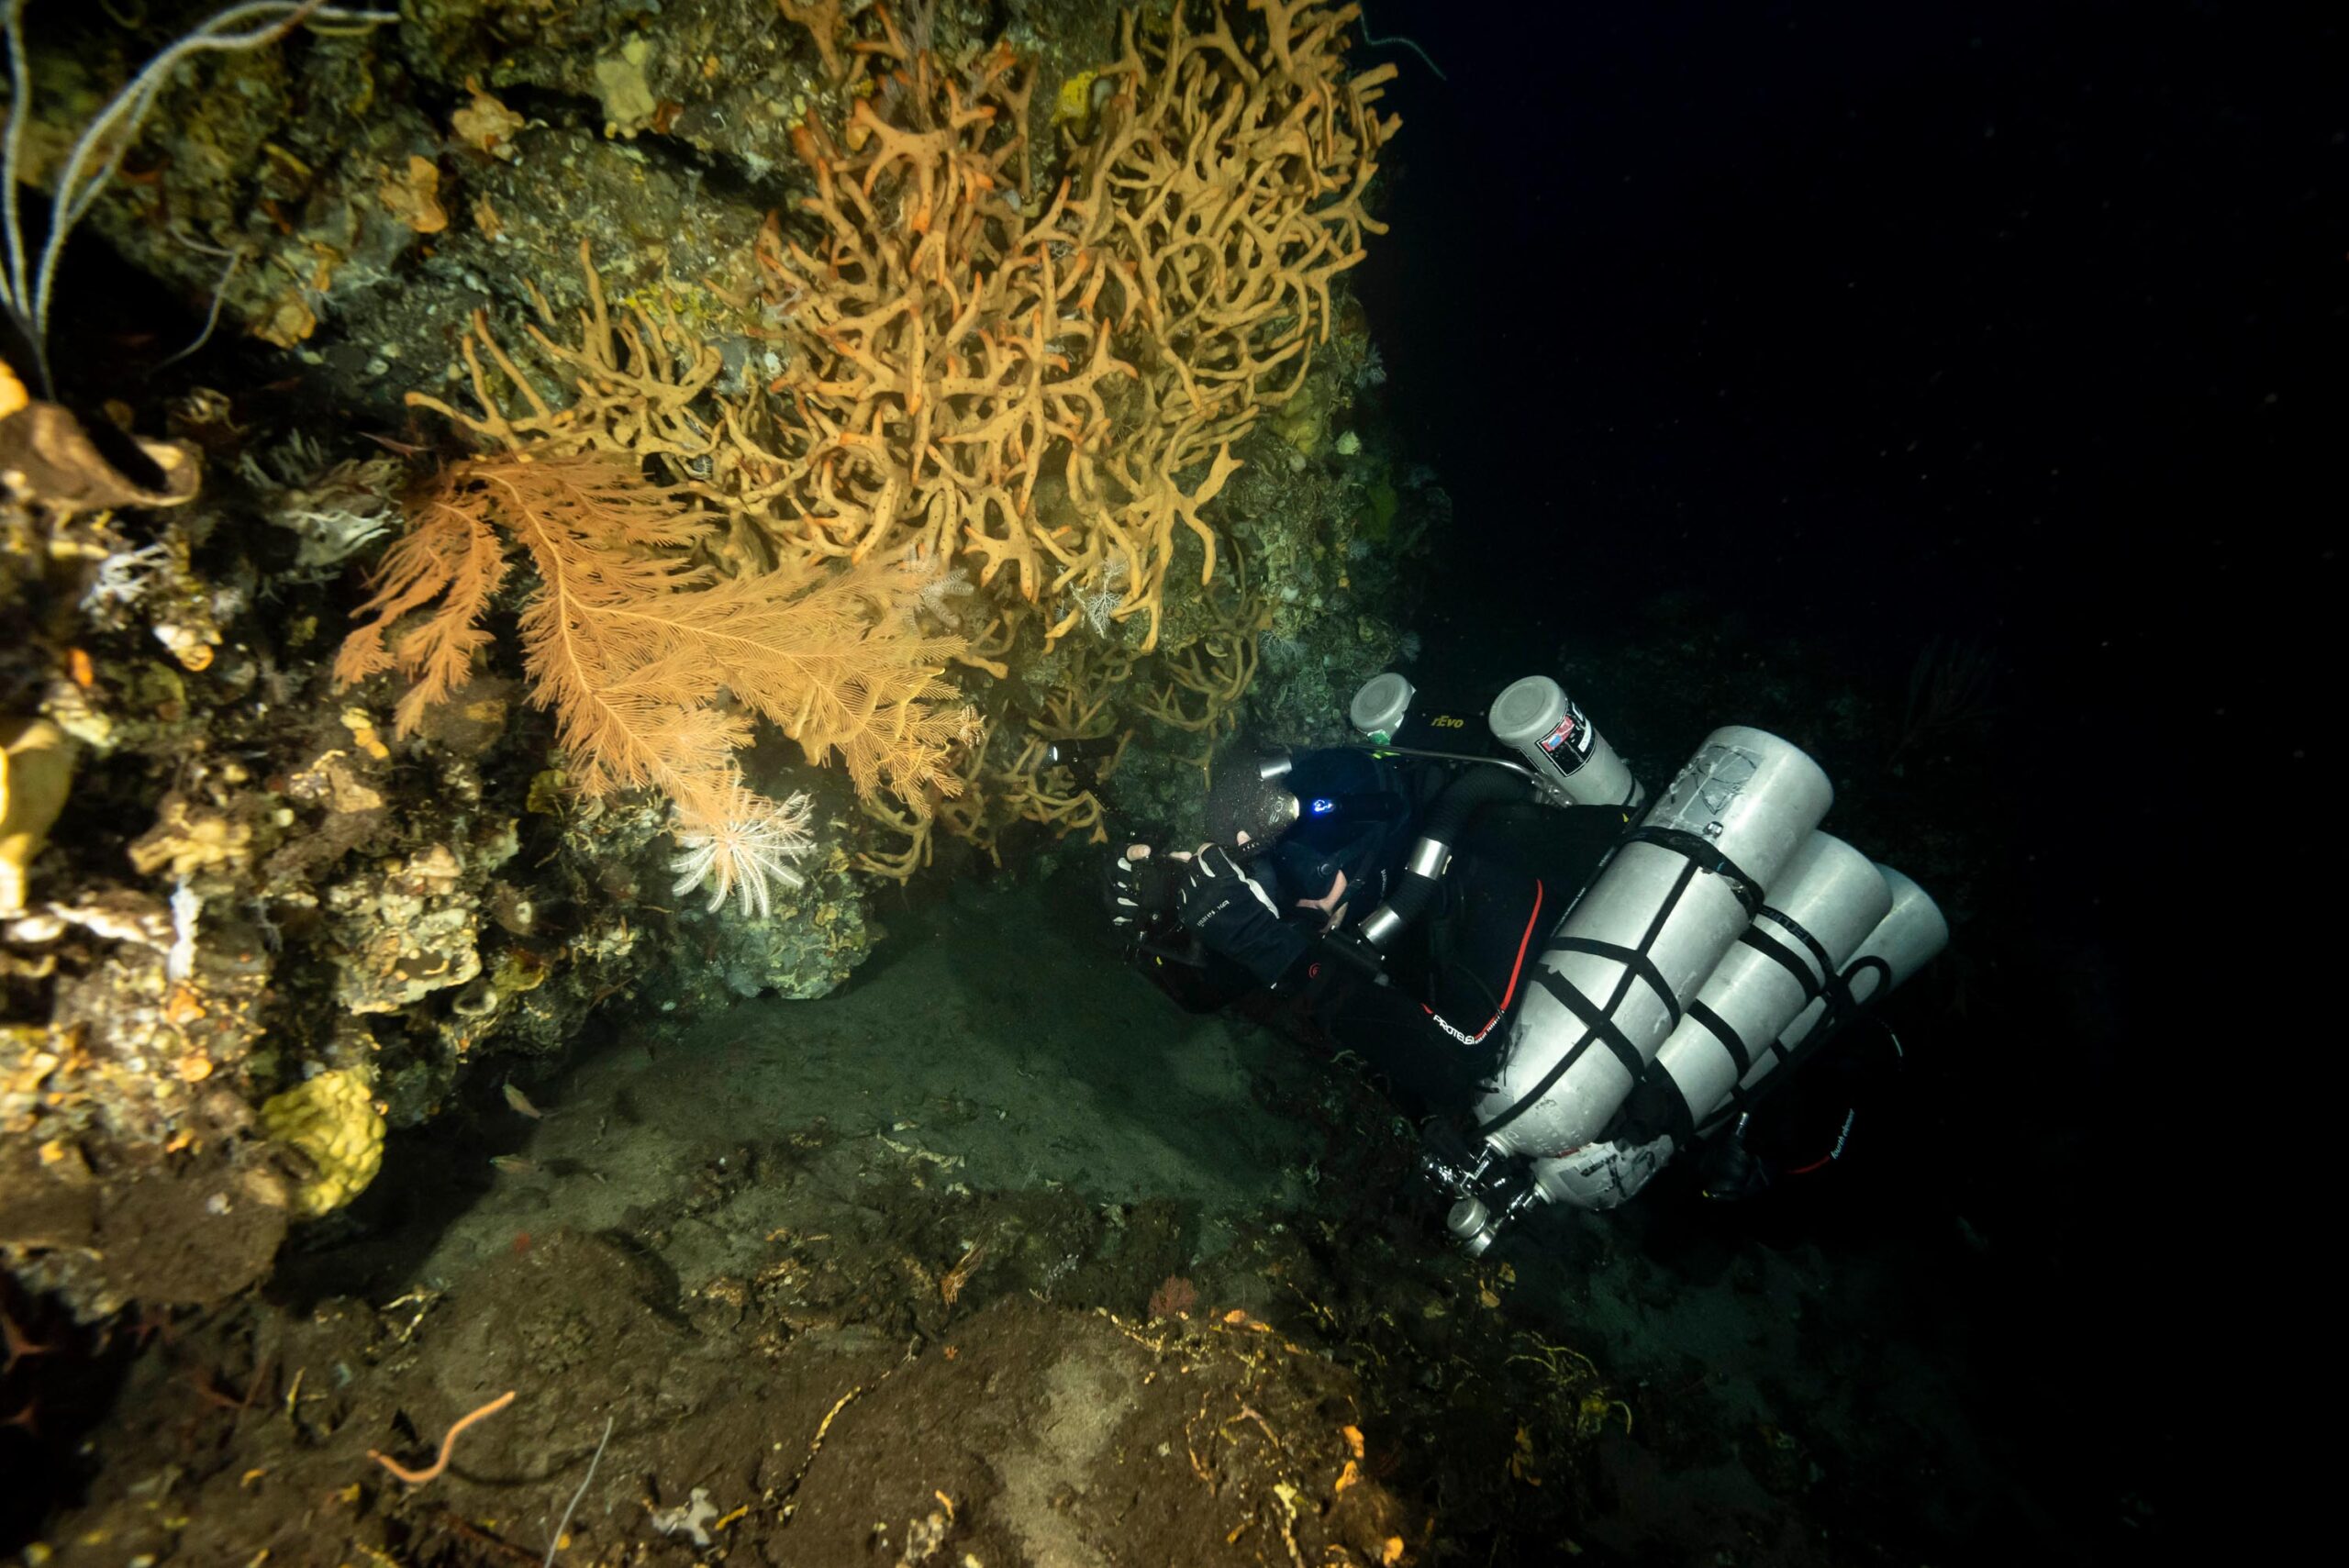 A diver documenting mesophotic coral ecosystems.